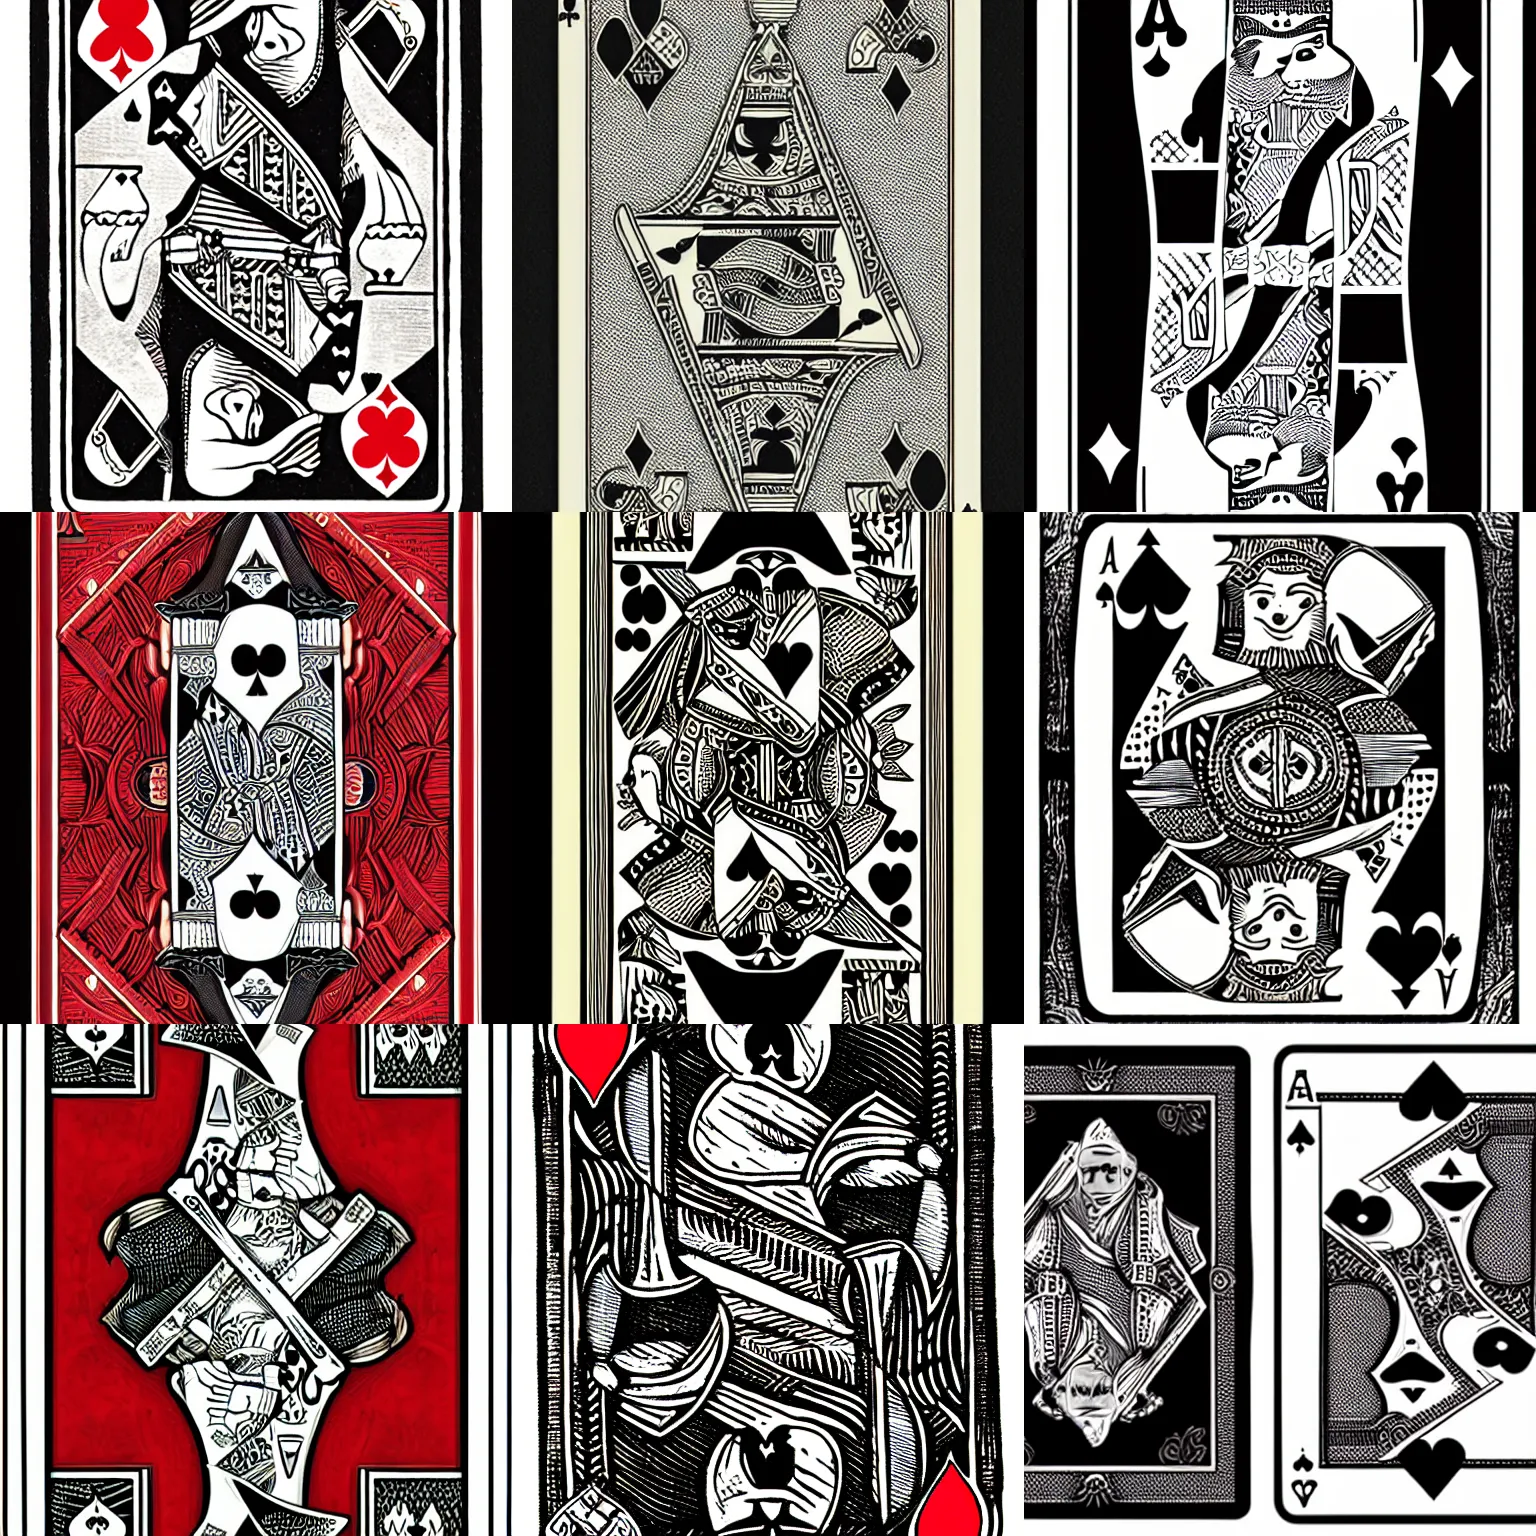 Prompt: playing card design of an ace of spades including a weasel, drawn by escher